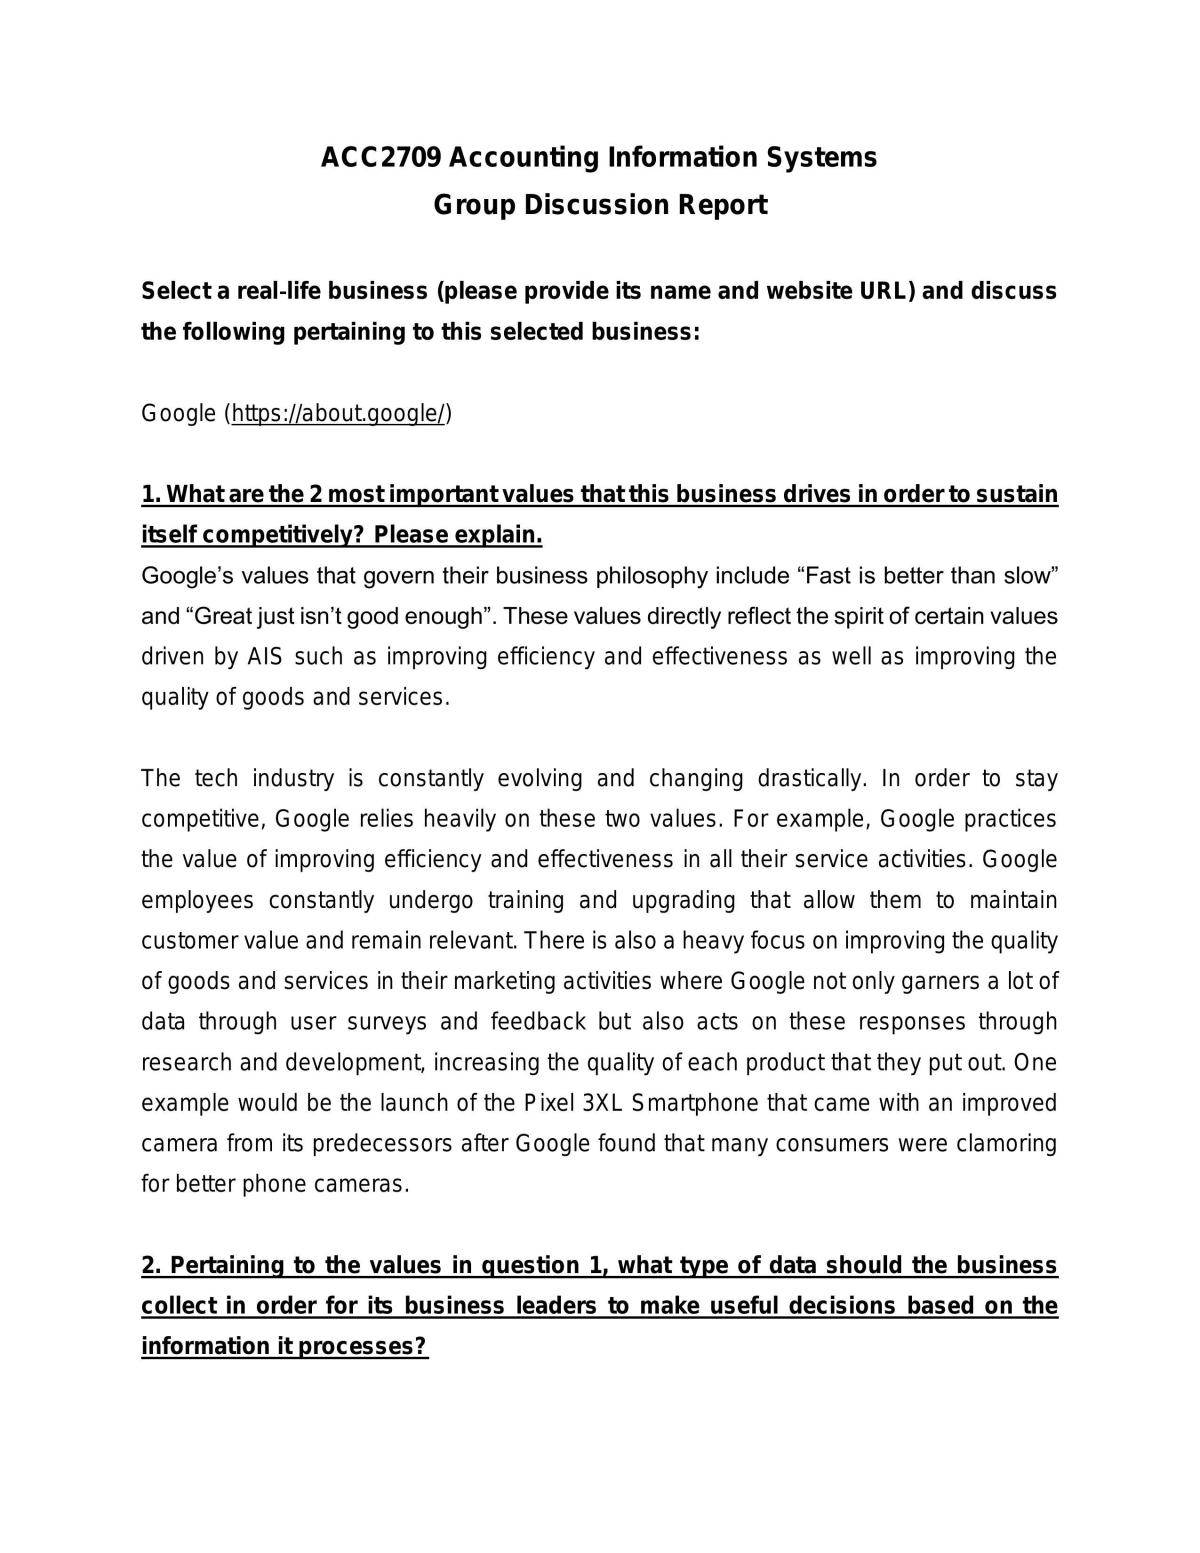 ACC2709 - Group Discussion Report - Page 1